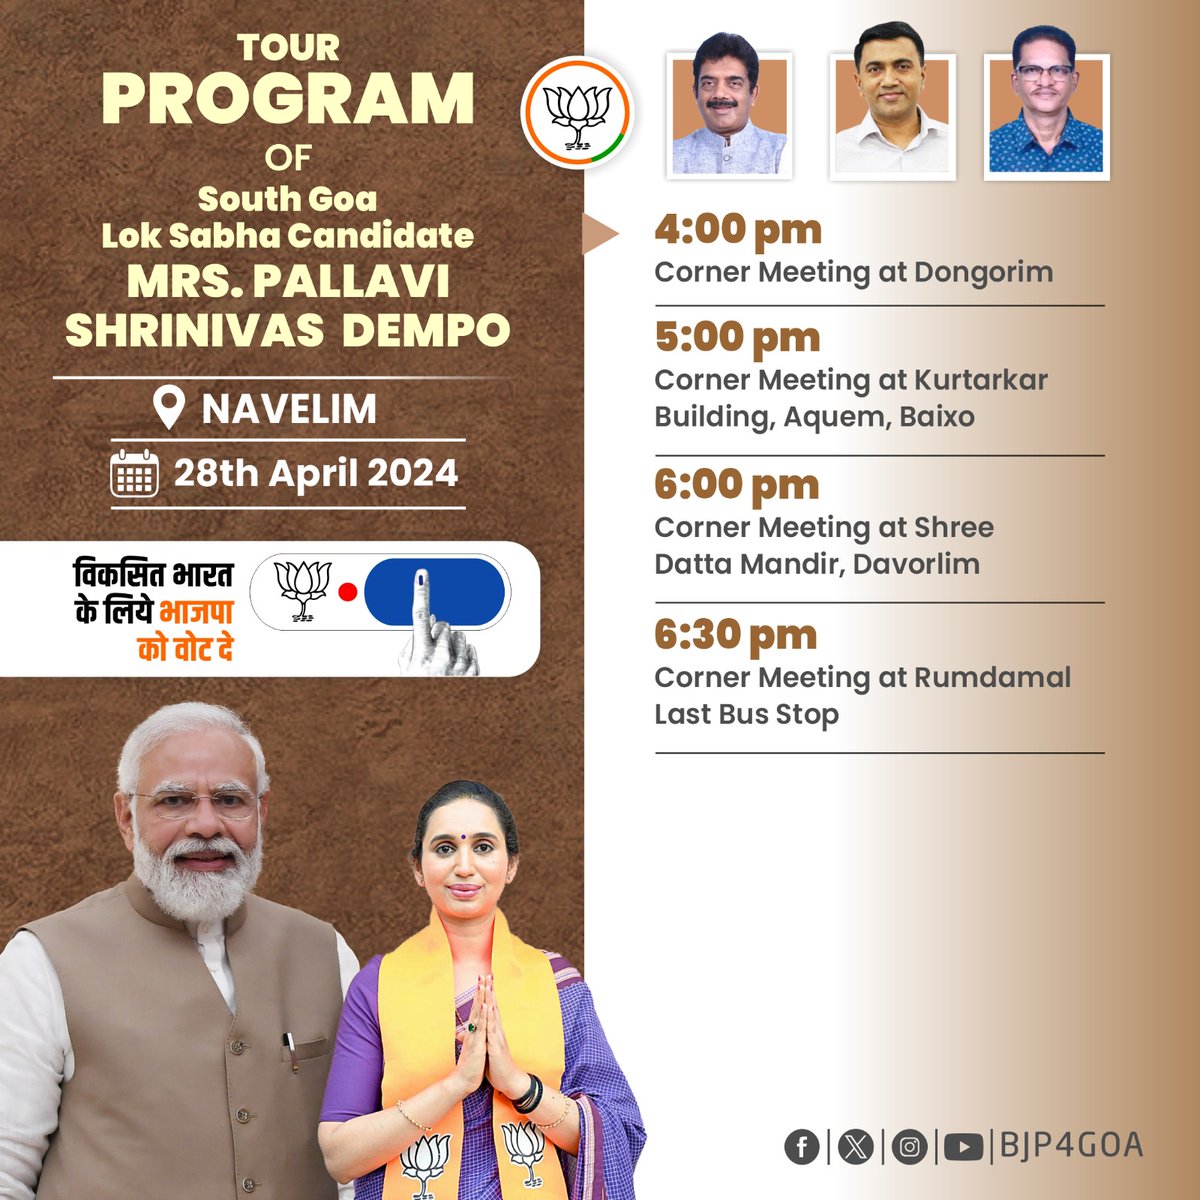 We will be in Fatorda and Navelim today